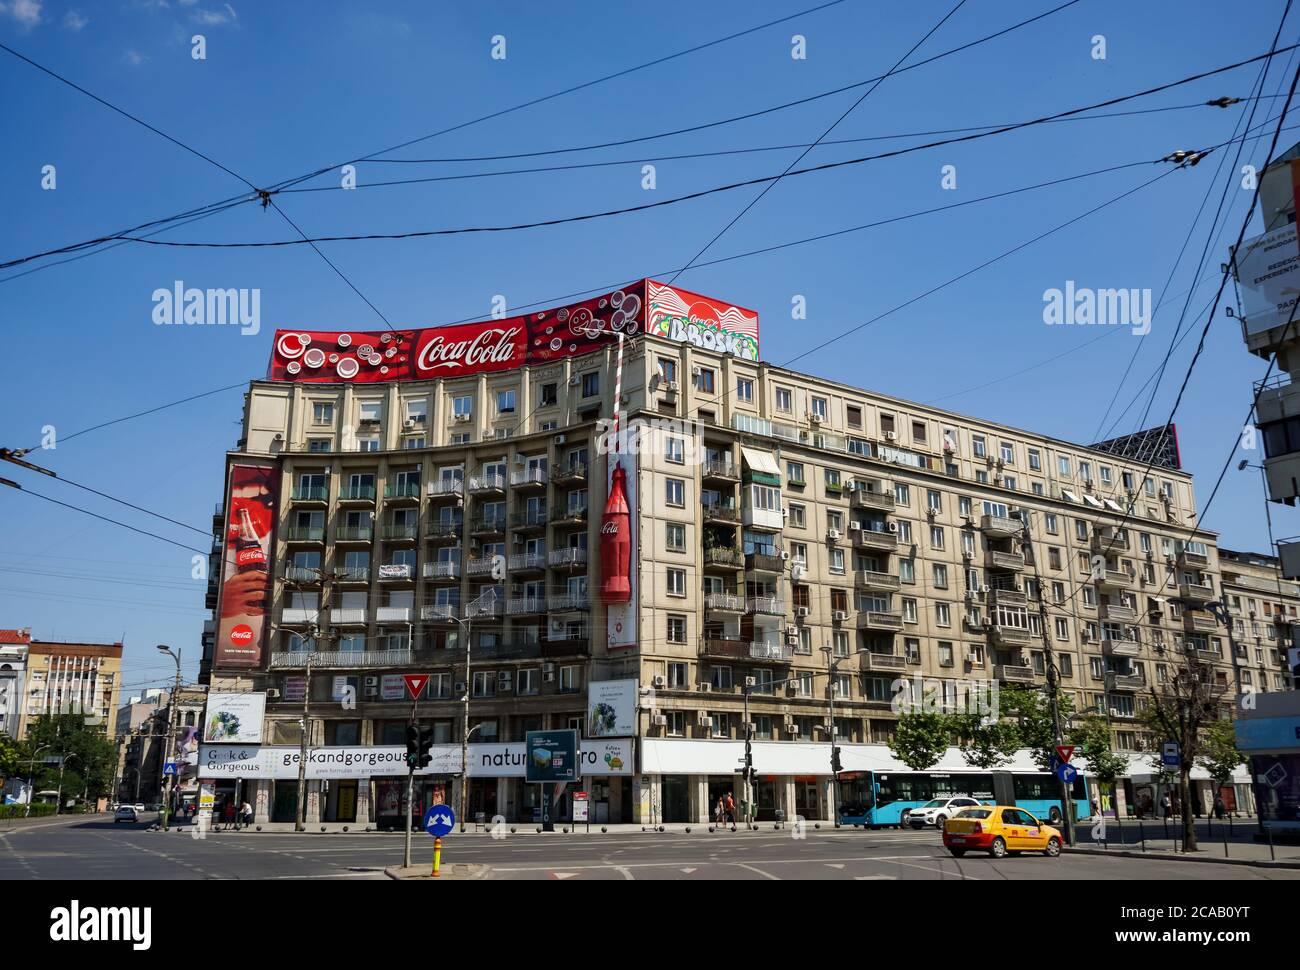 Bucharest, Romania -  June 28, 2020: A very large logo of Coca-Cola soft drink manufacturer is displayed on the top of a block of flats, in Piata Roma Stock Photo